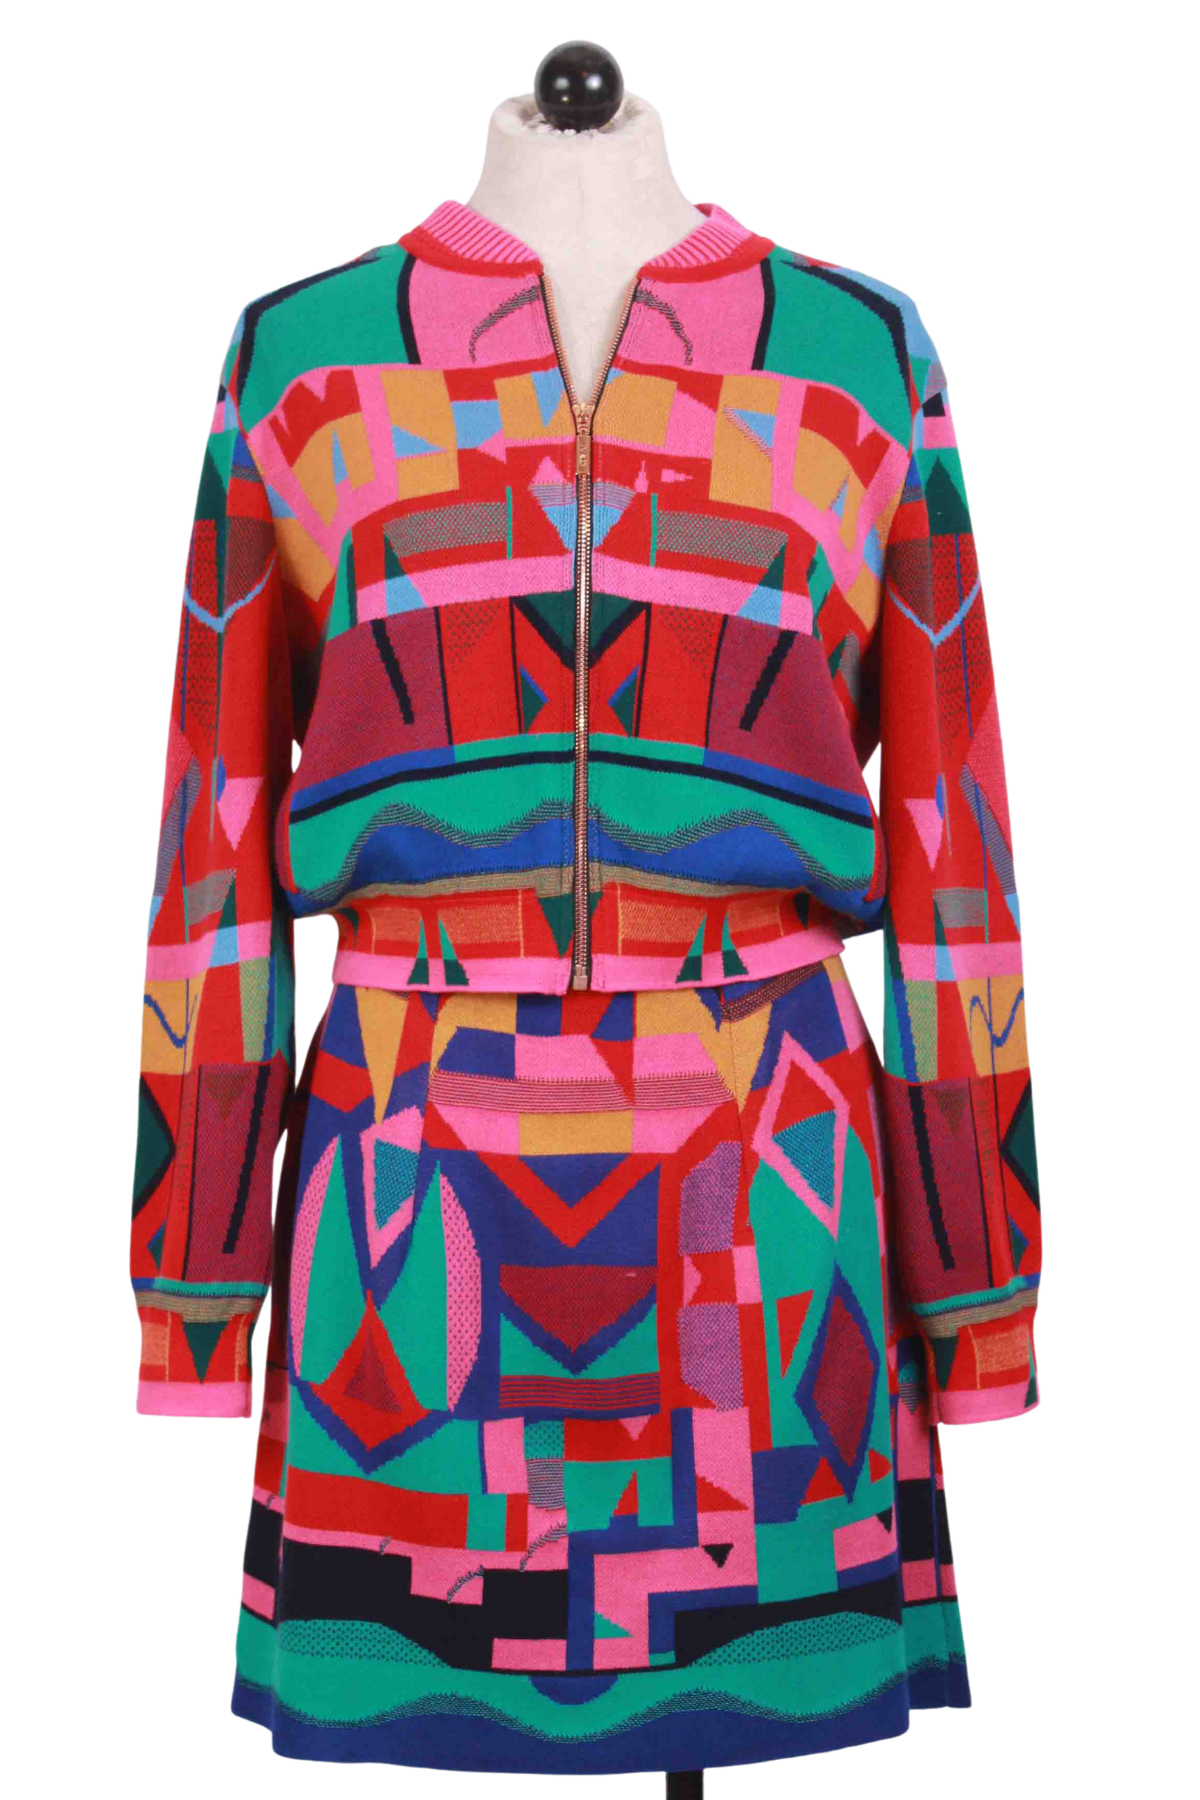 Cherry Multi Abstract Pattern Mini Skirt by Ivko with the Cherry Multi Abstract Pattern Zip Front Jacket